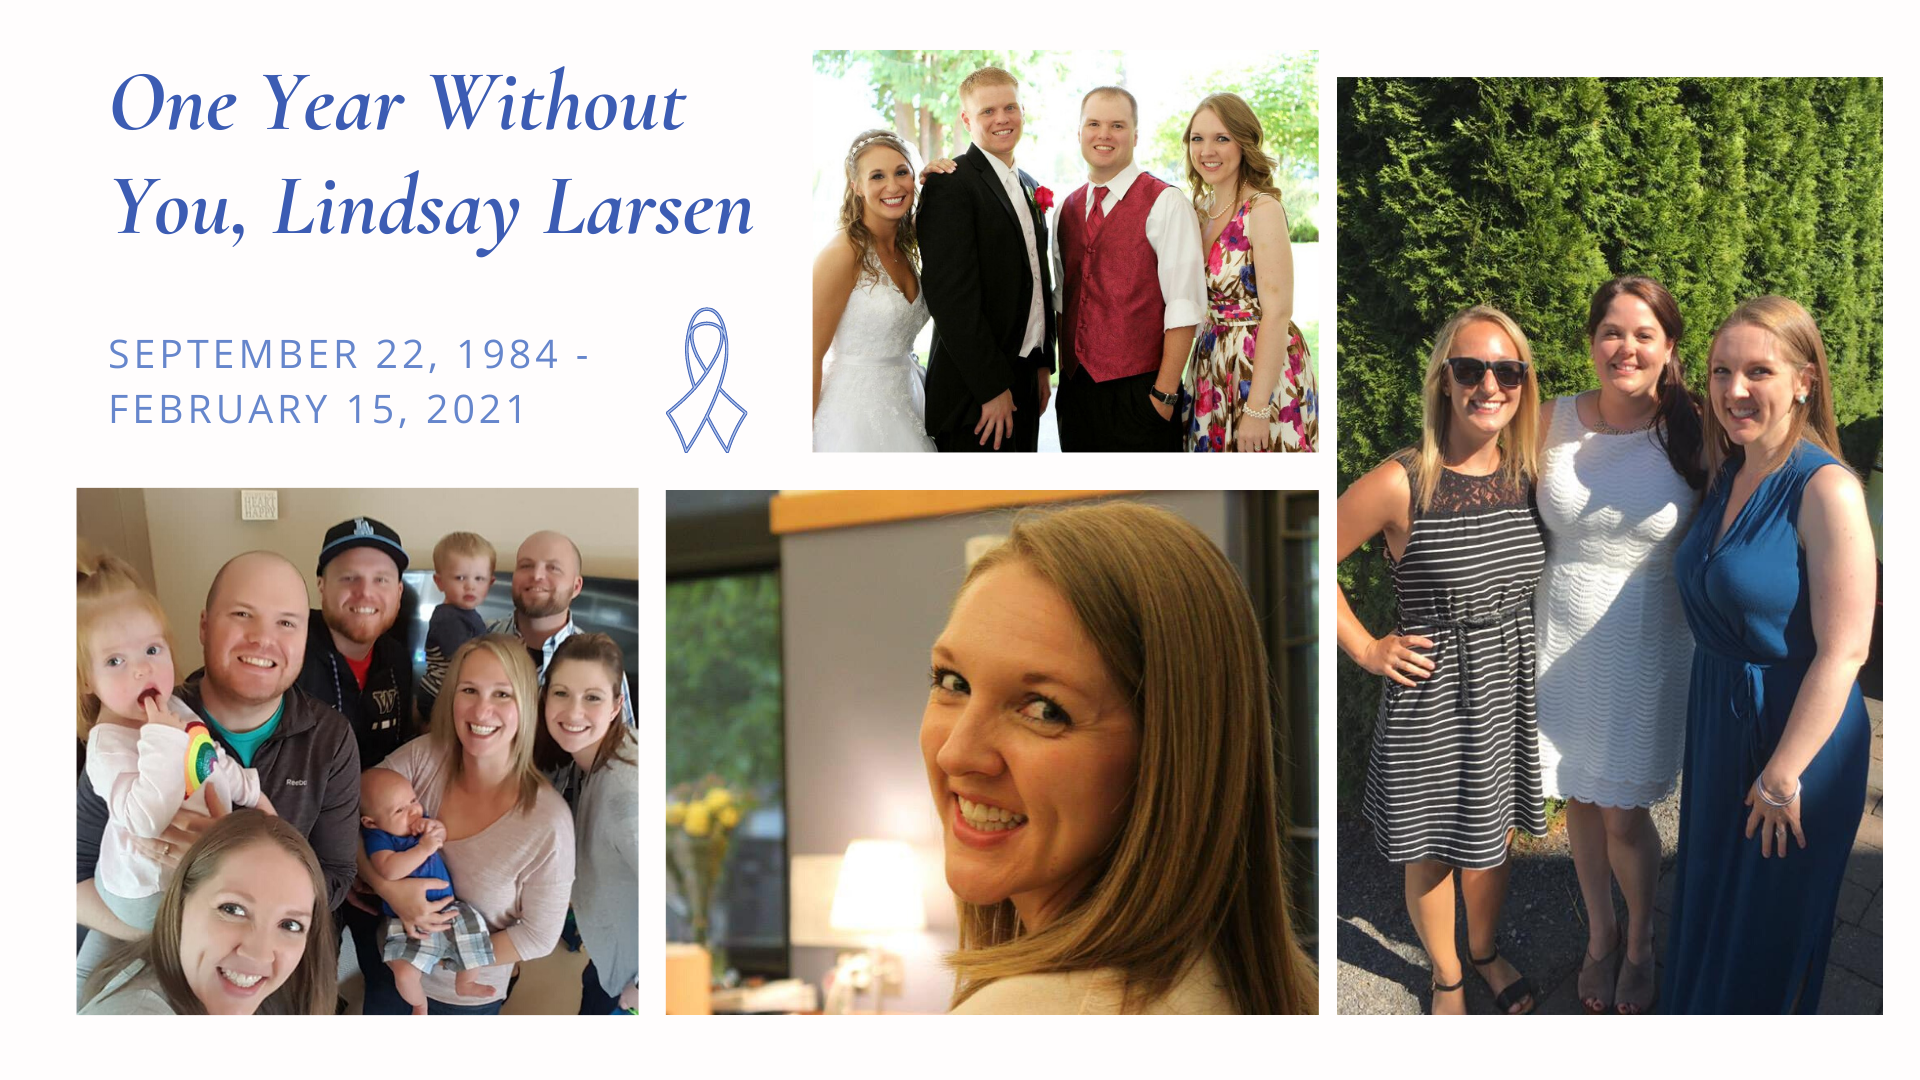 One Year Without You, Lindsay.